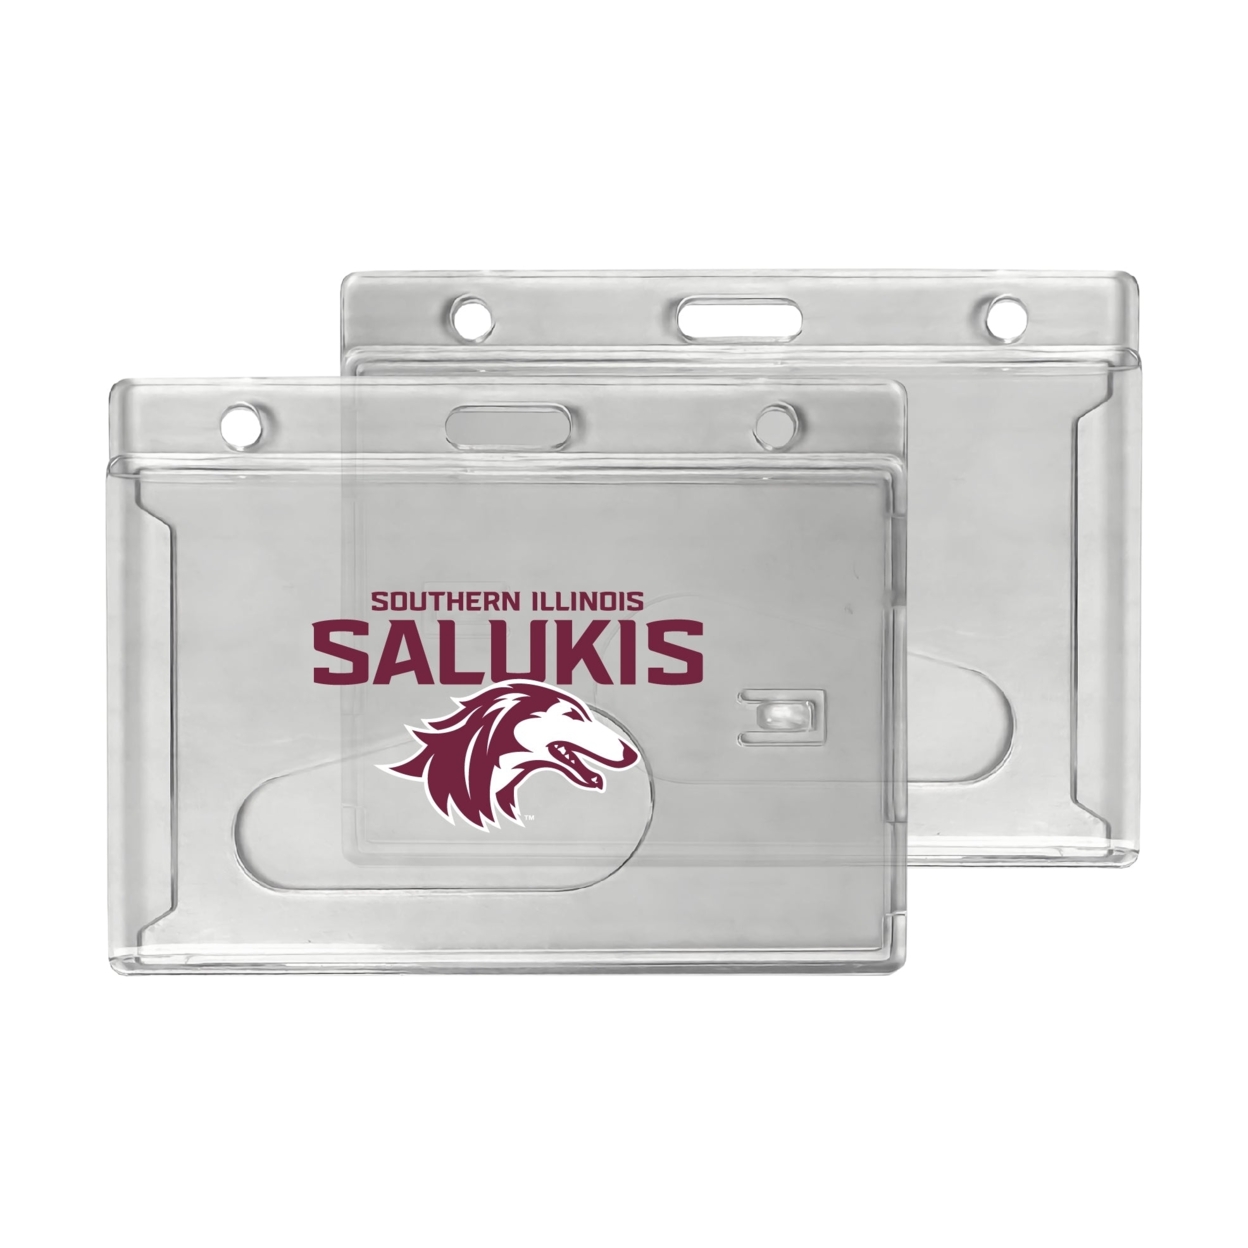 Southern Illinois Salukis Clear View ID Holder